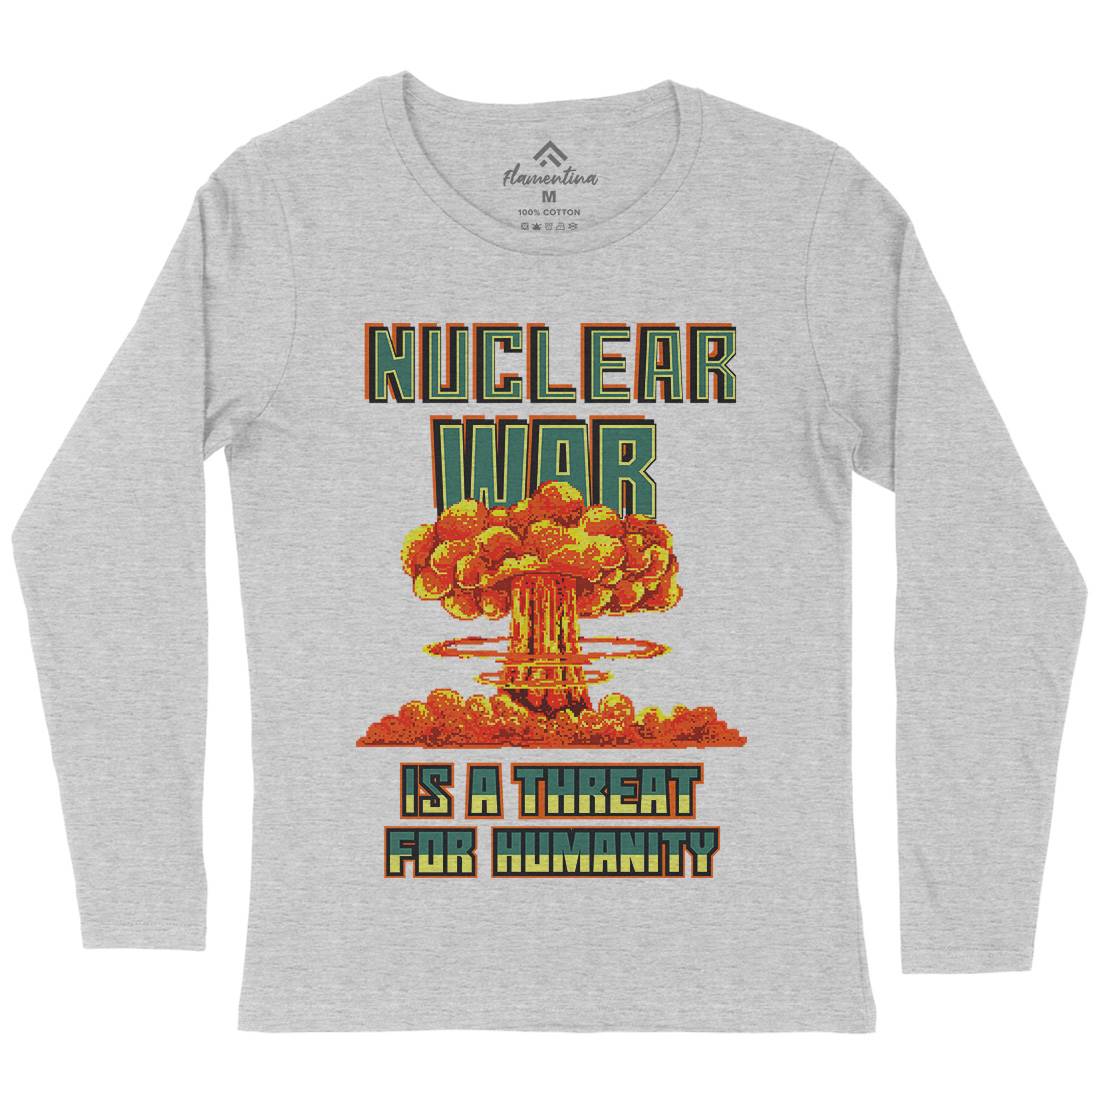 Nuclear War Is A Threat For Humanity Womens Long Sleeve T-Shirt Army B941